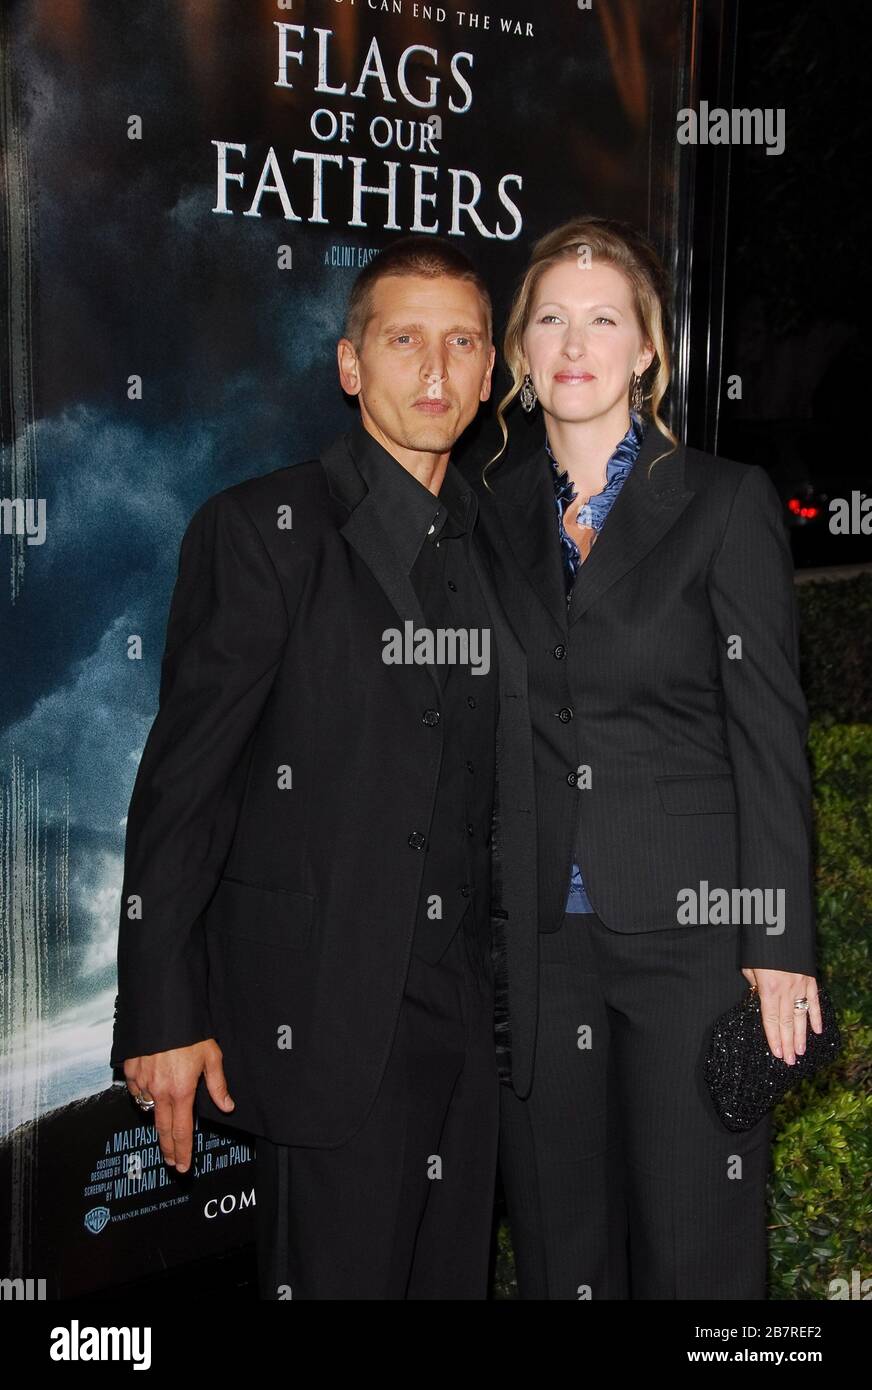 Barry Pepper and Wife Cindy at the Los Angeles Premiere of "Flags Of Our  Fathers" held at the Academy of Motion Picture Arts and Sciences in Beverly  Hills, CA. The event took